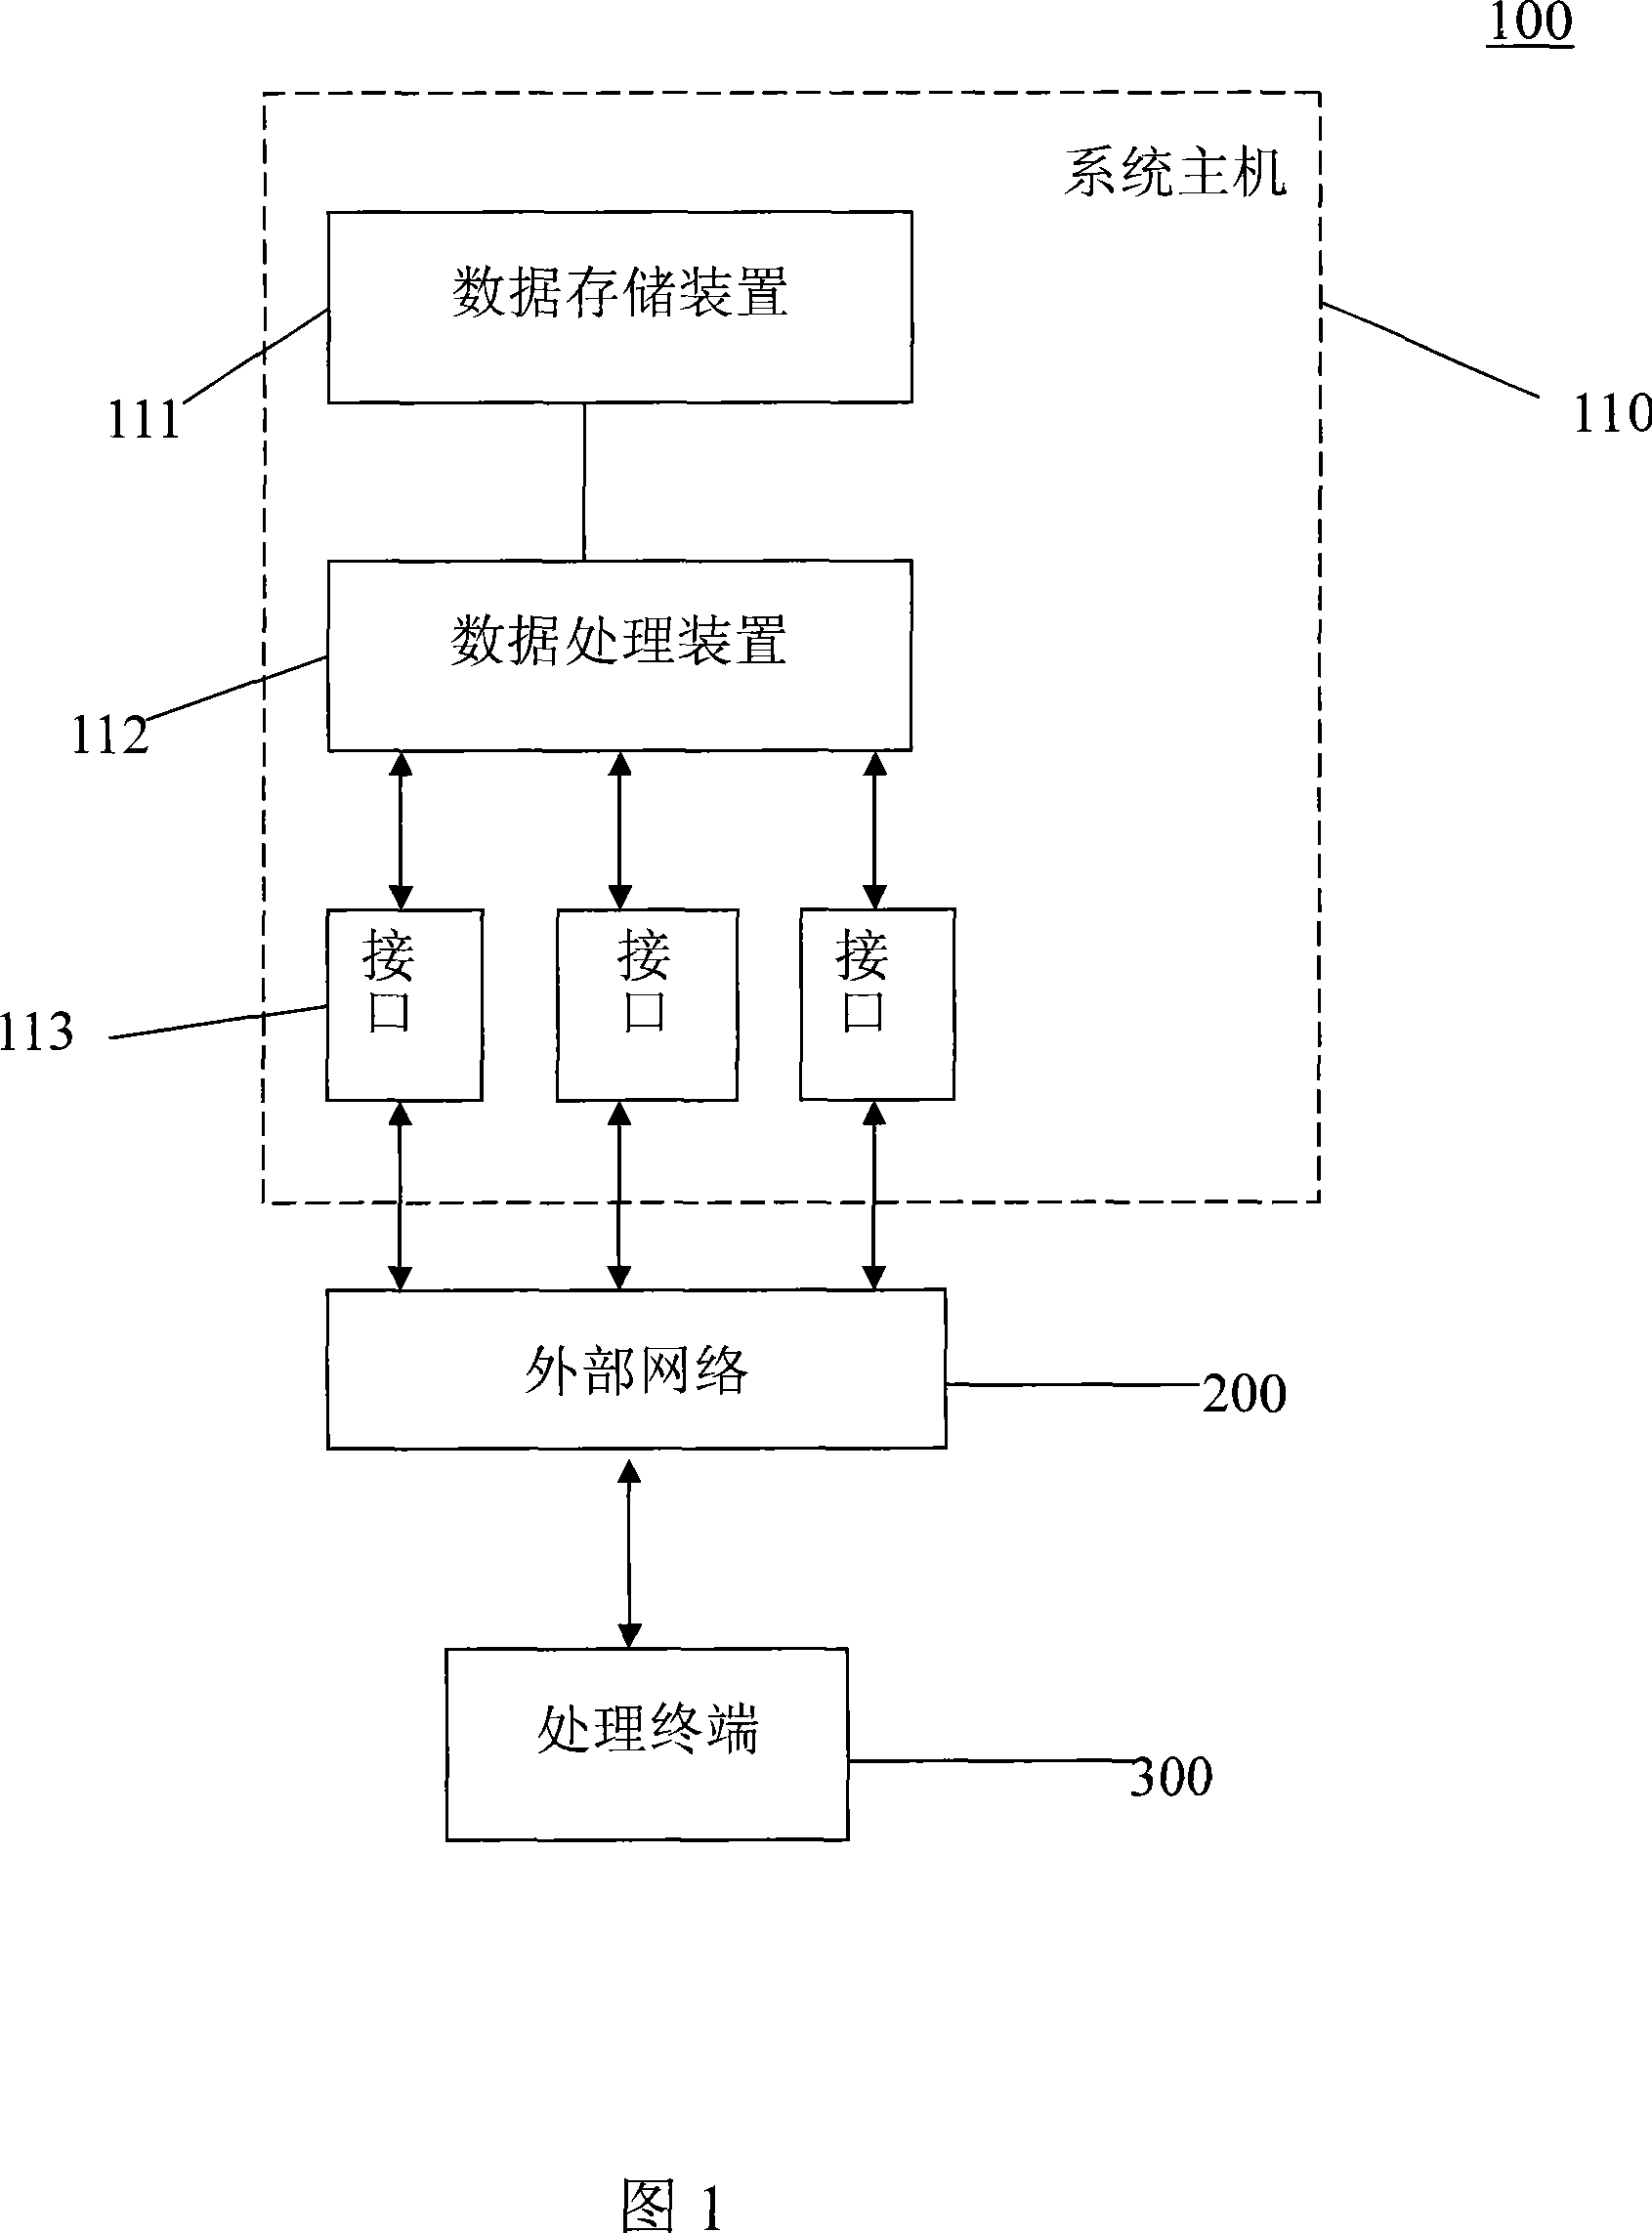 Computer data processing system and processing method and application